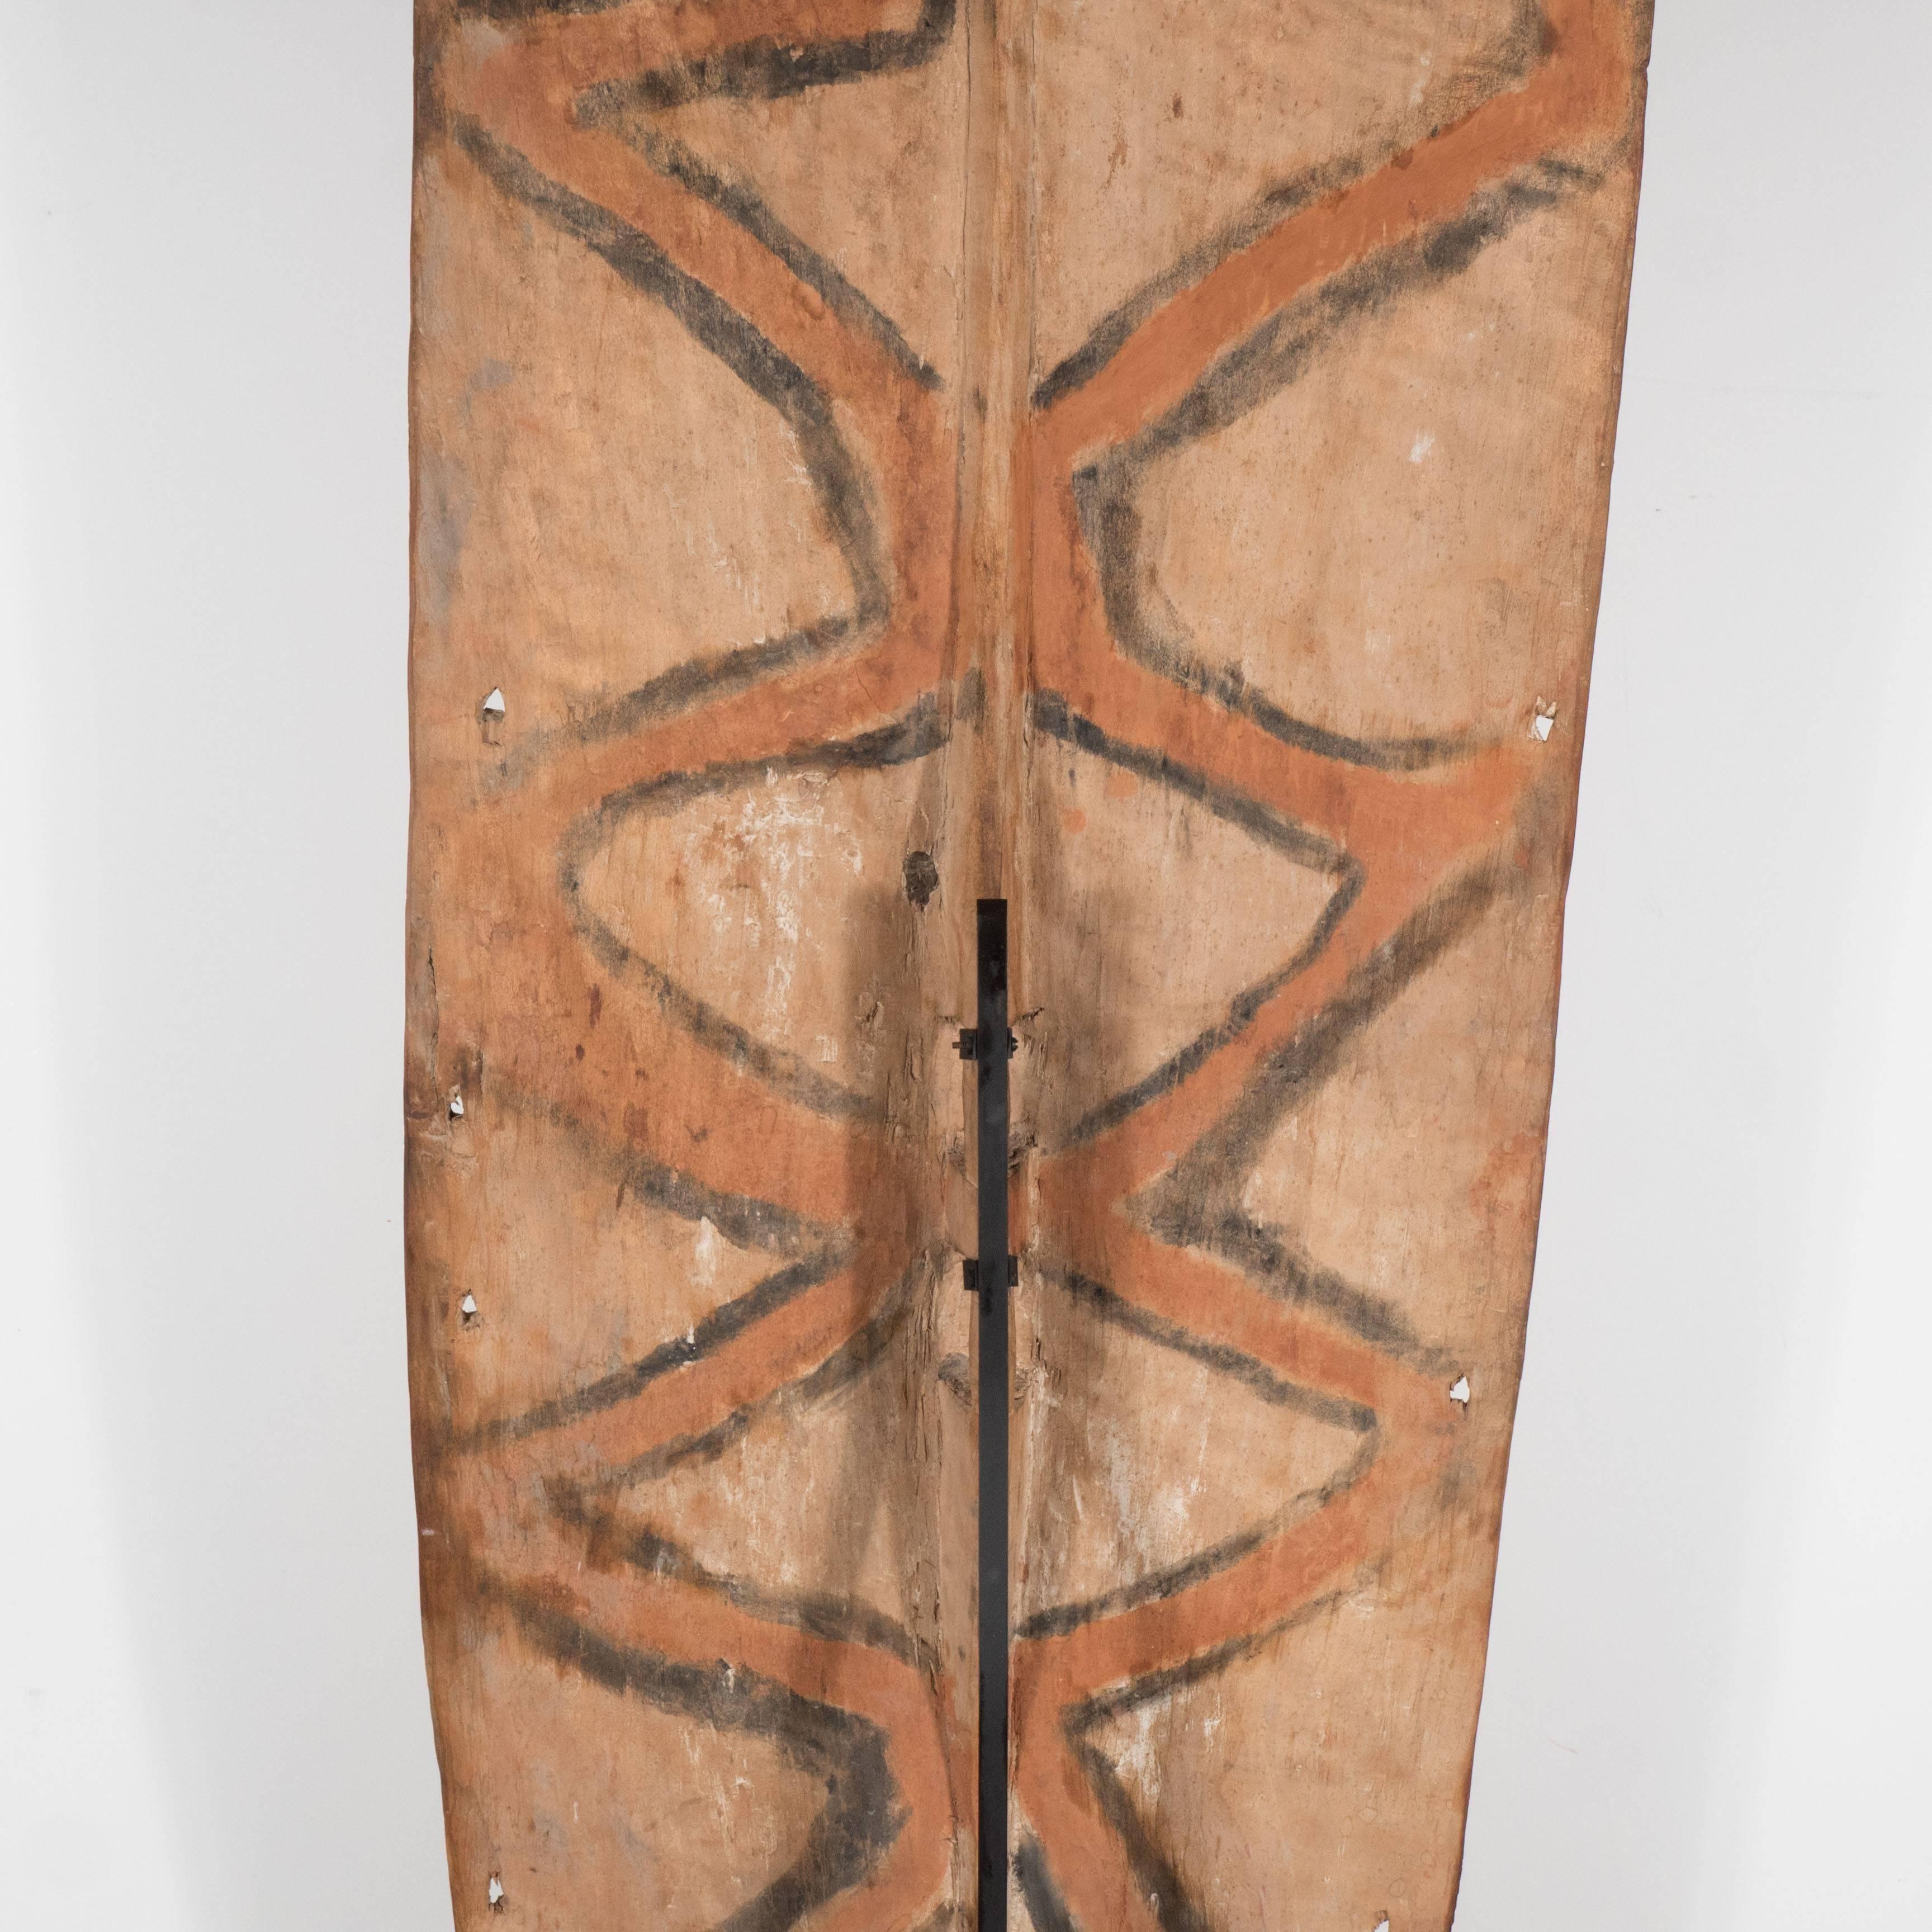 This striking shield was realized in Papua New Guinea towards the end of the 19th century. The rectangular form in unfinished nubuck hued hardwood has been inscribed with white curvilinear and geometric patterns. A small carved wood figurine adorns